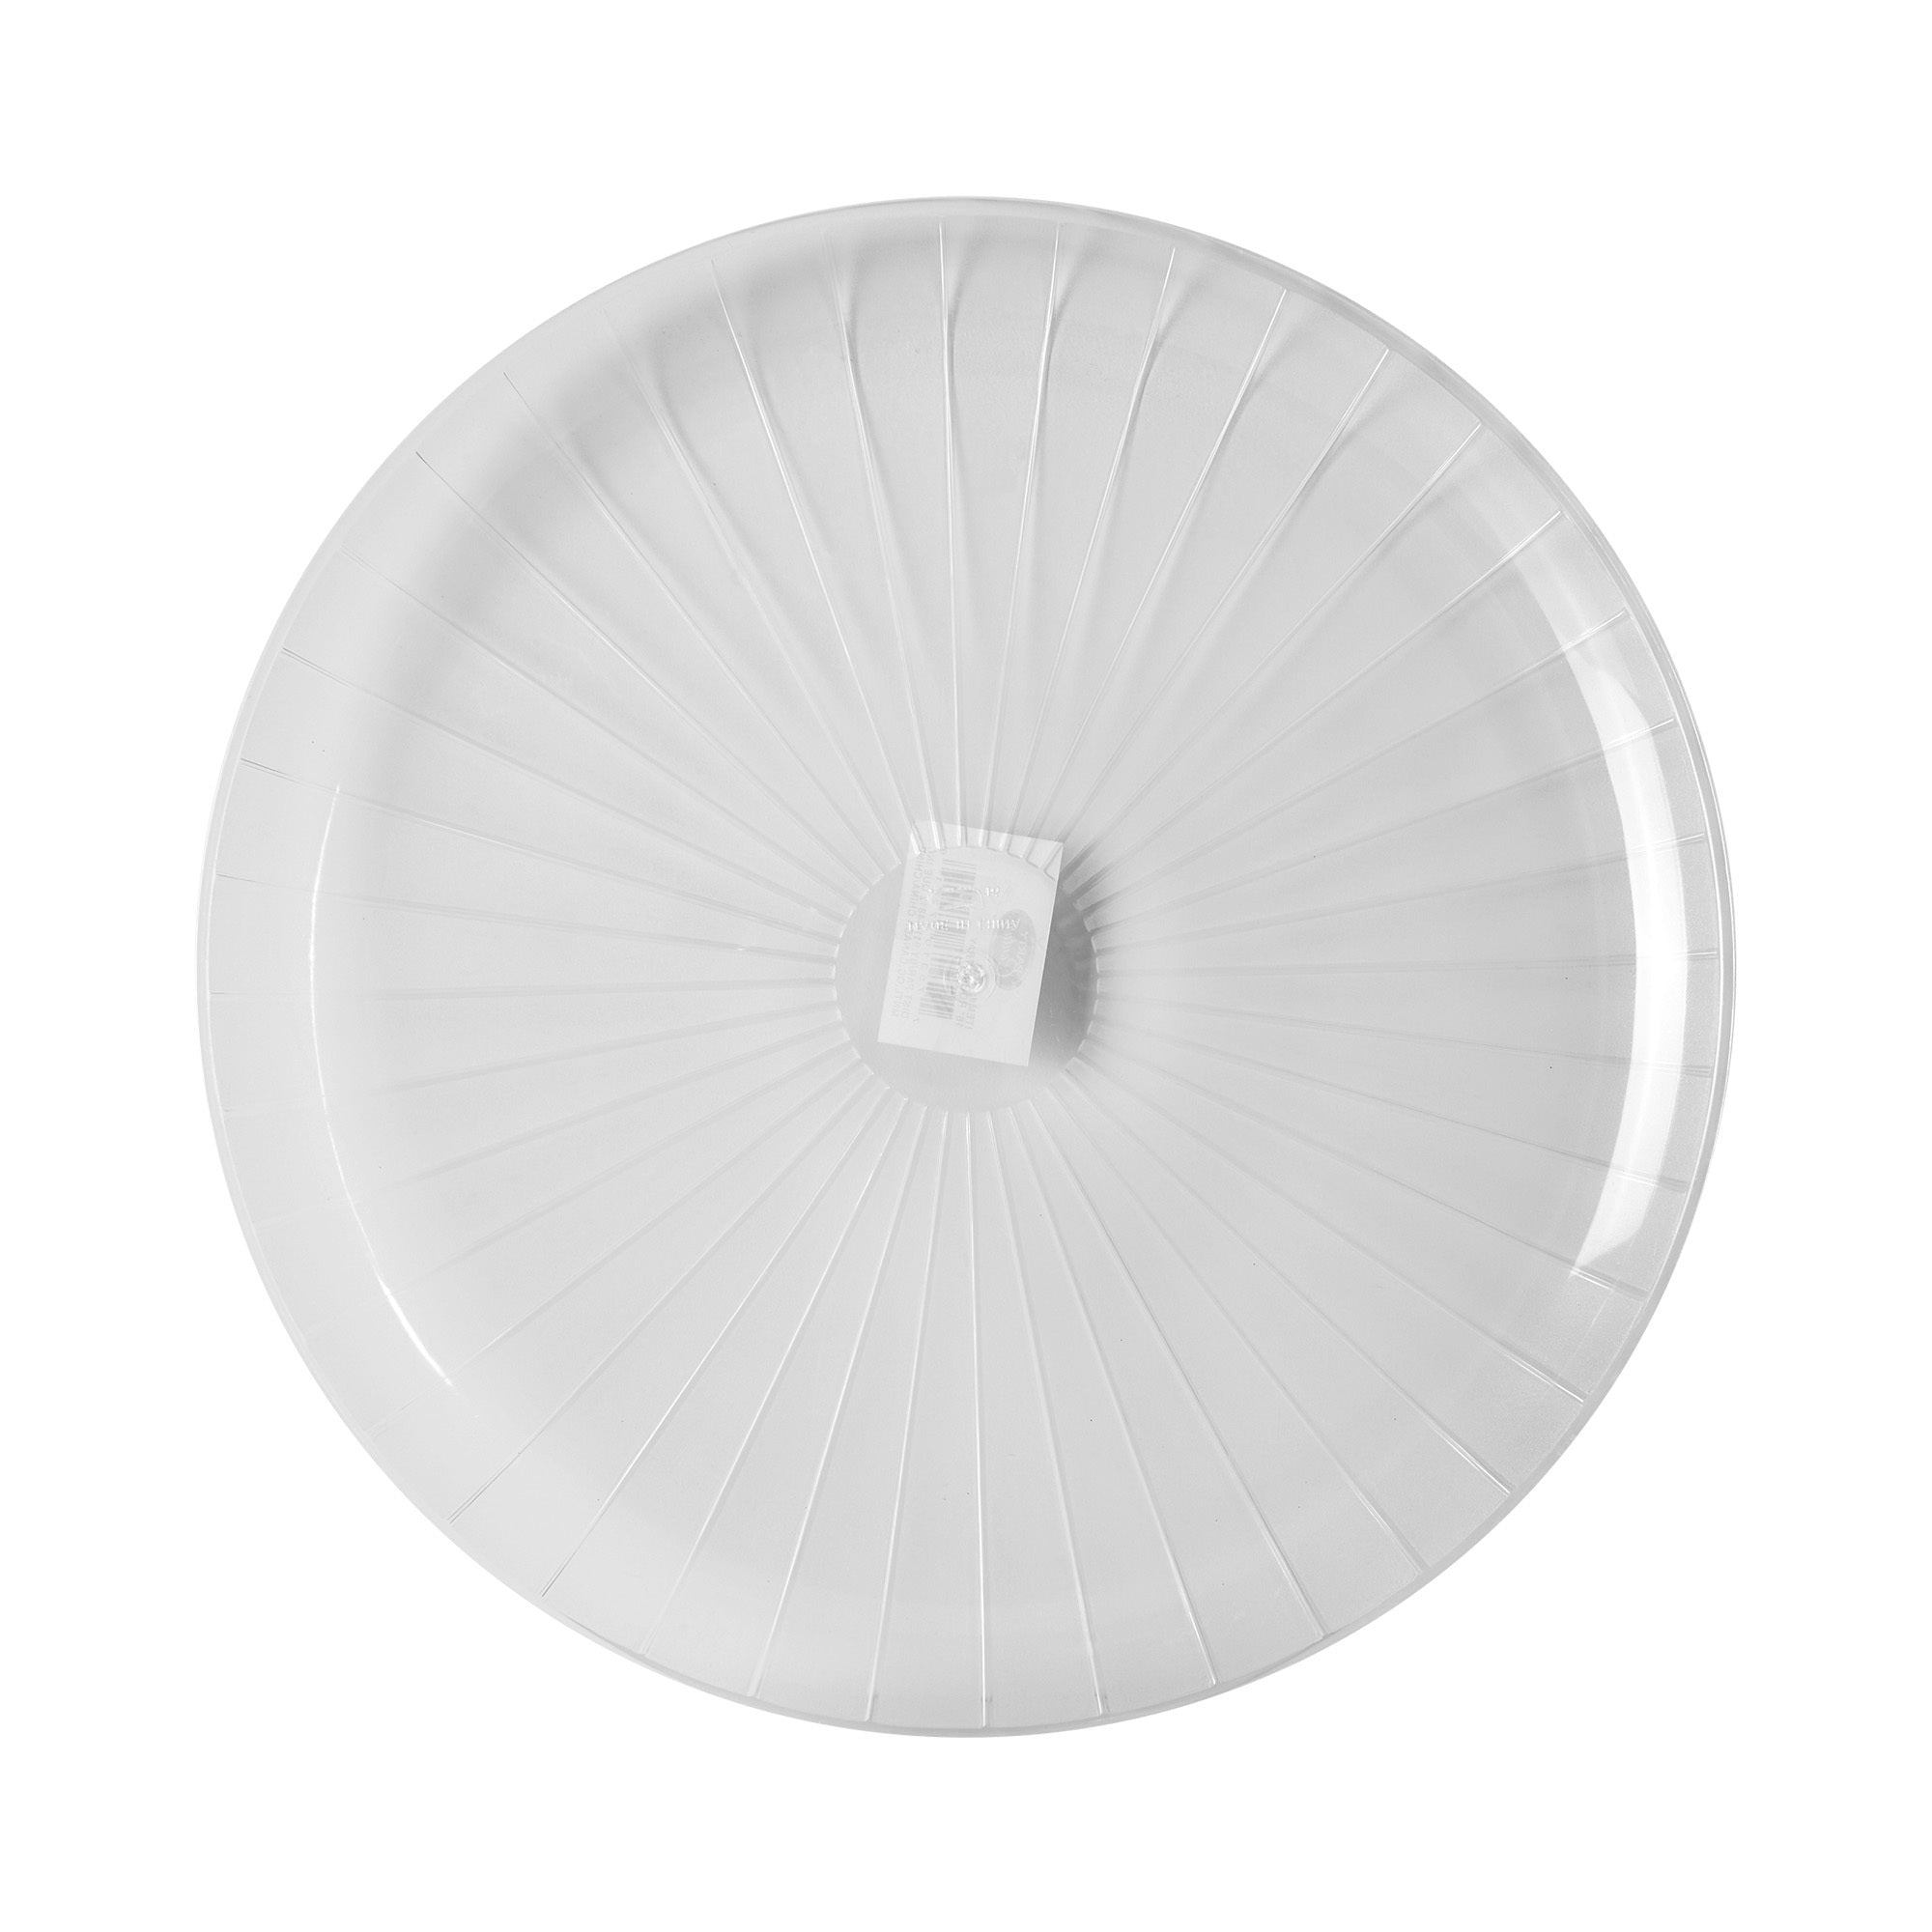 Premium Quality Clear 2 Tone Round Tray, 16 inches, 1 Count